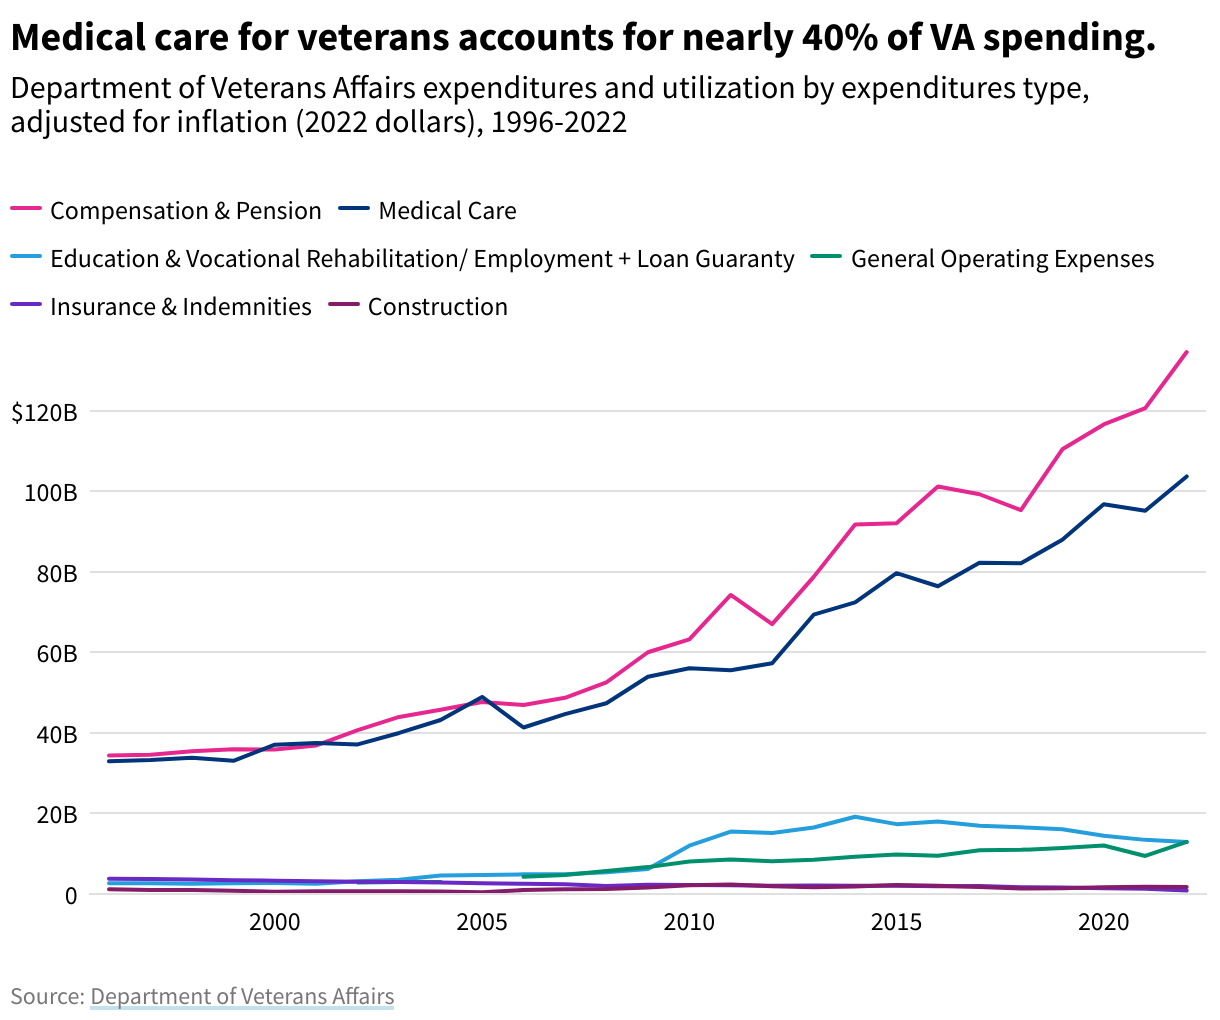 Line chart showing growing expenditures for veterans over time, with most of that growth coming from compensation/pension and medical care